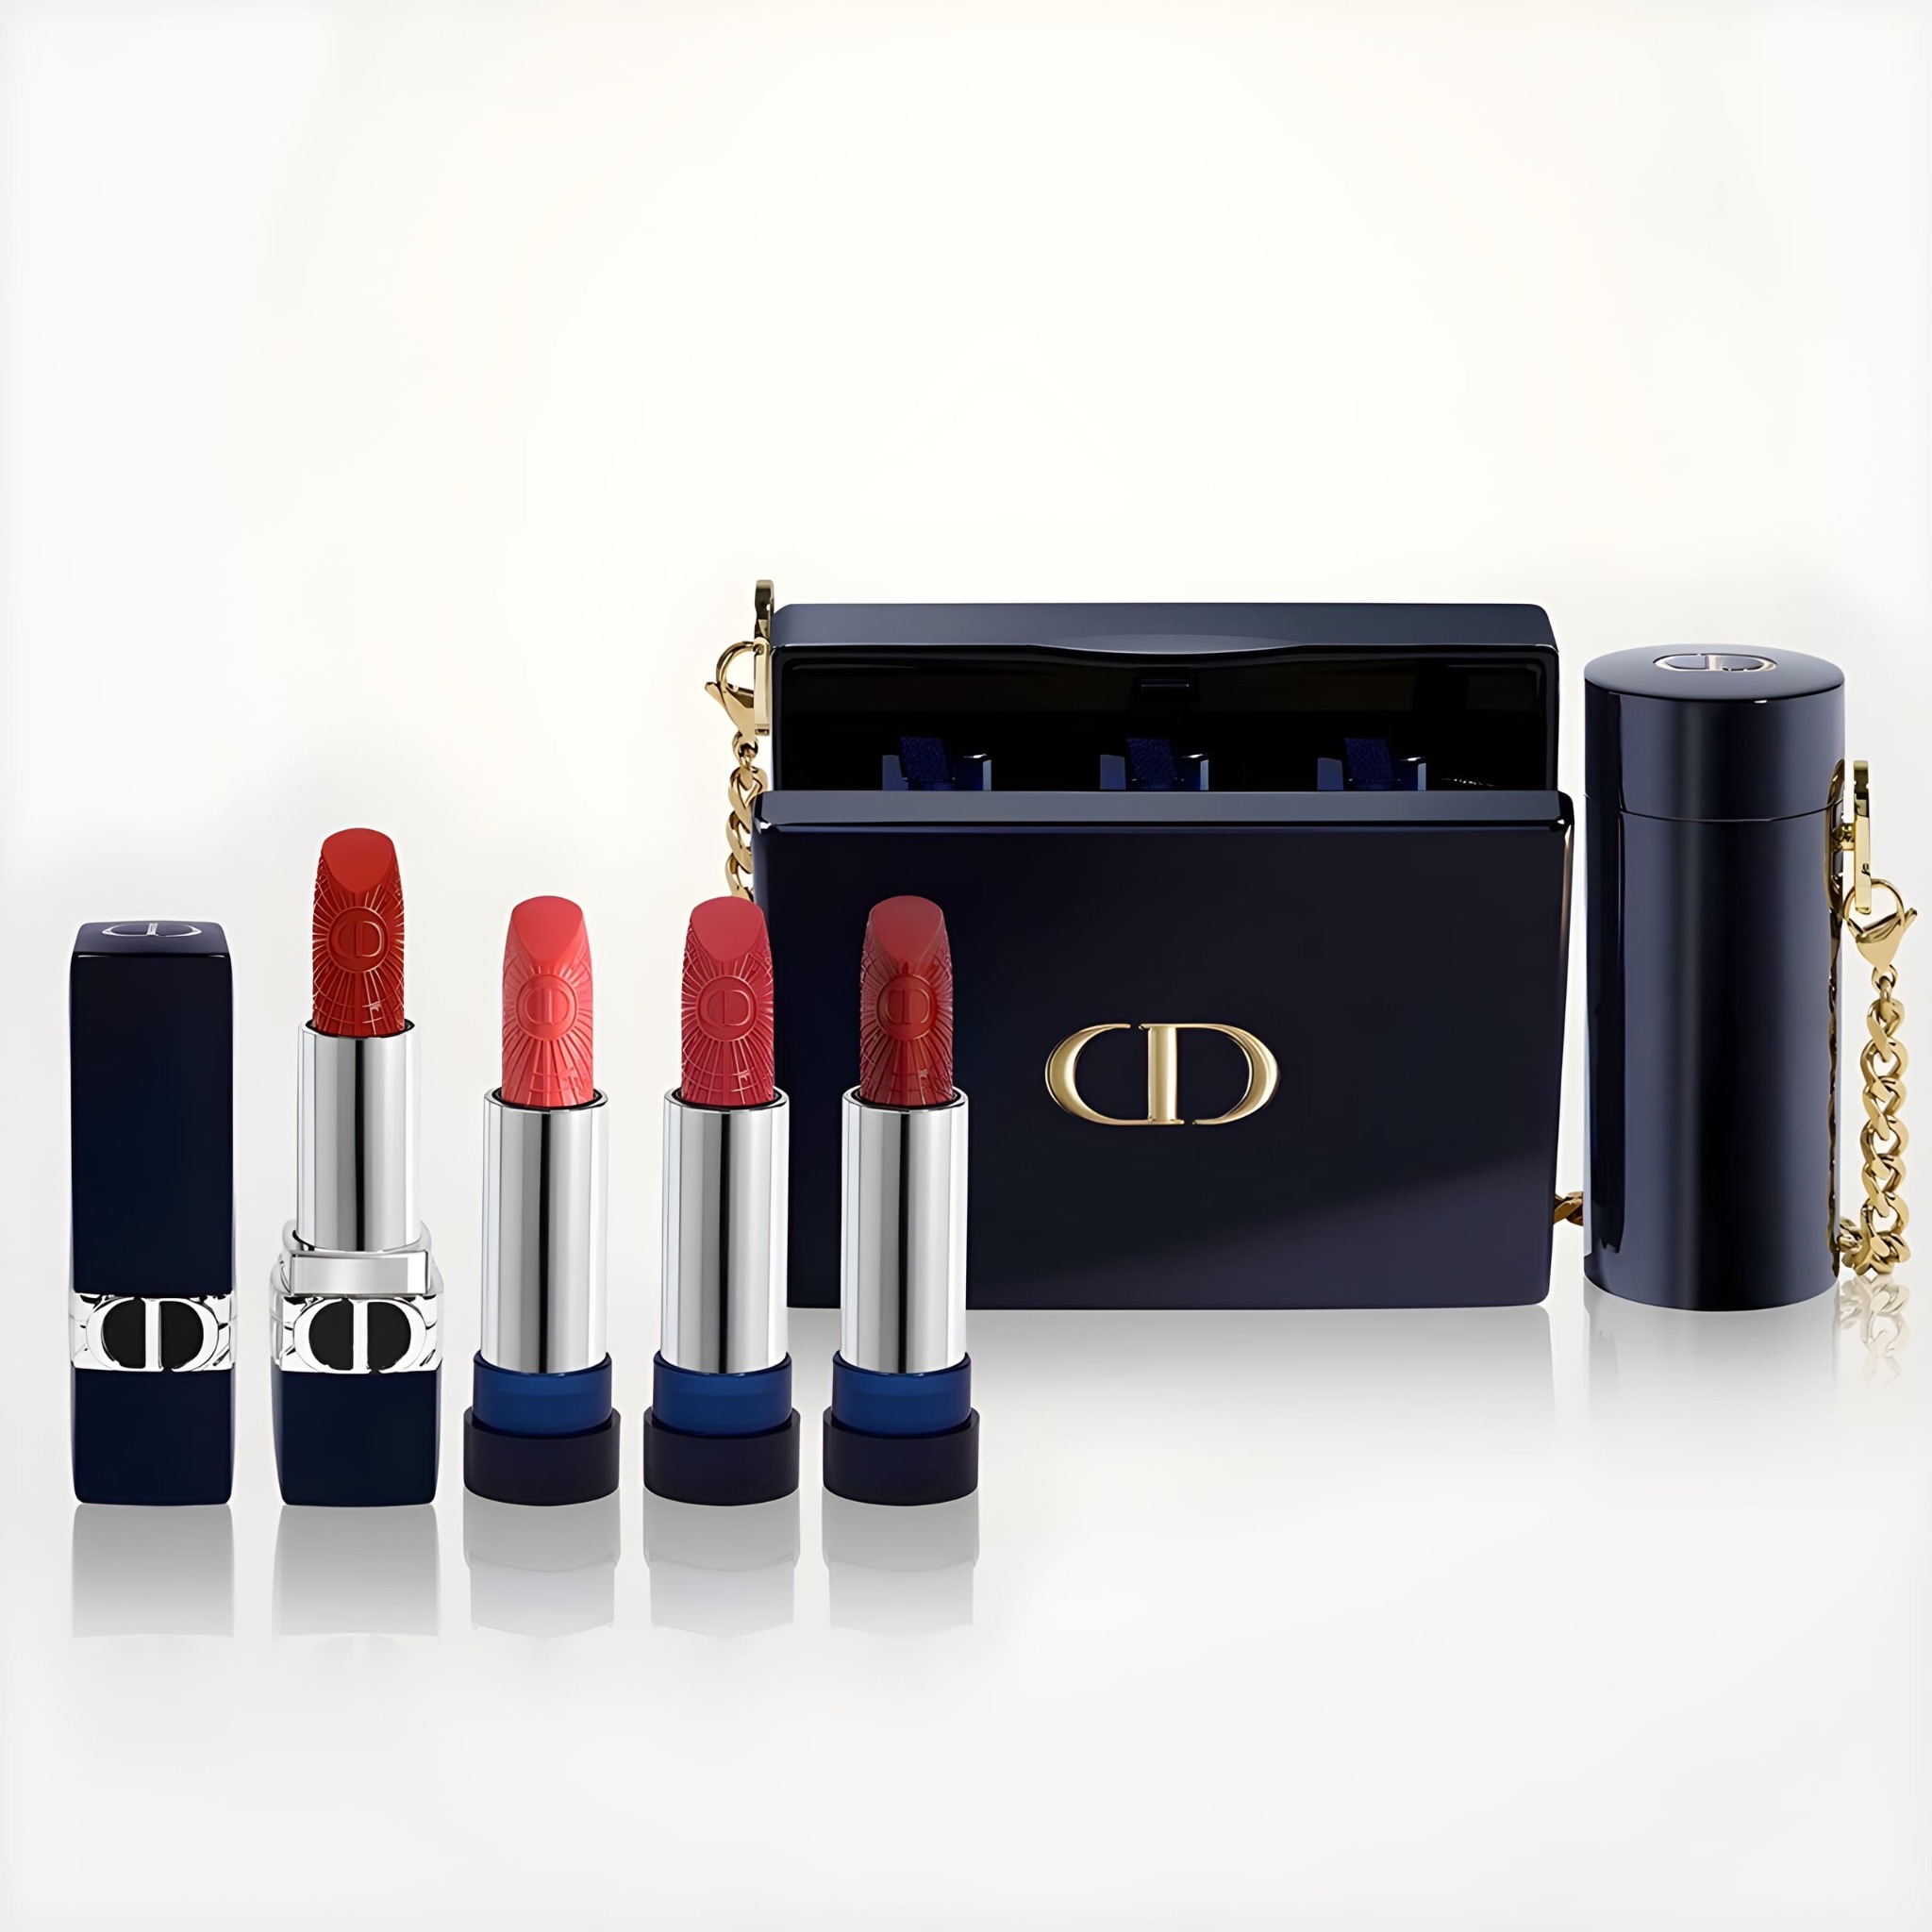 limited ROUGE DIOR MINAUDIÈRE - LIMITED EDITION Clutch and lipstick holder - lipstick collection